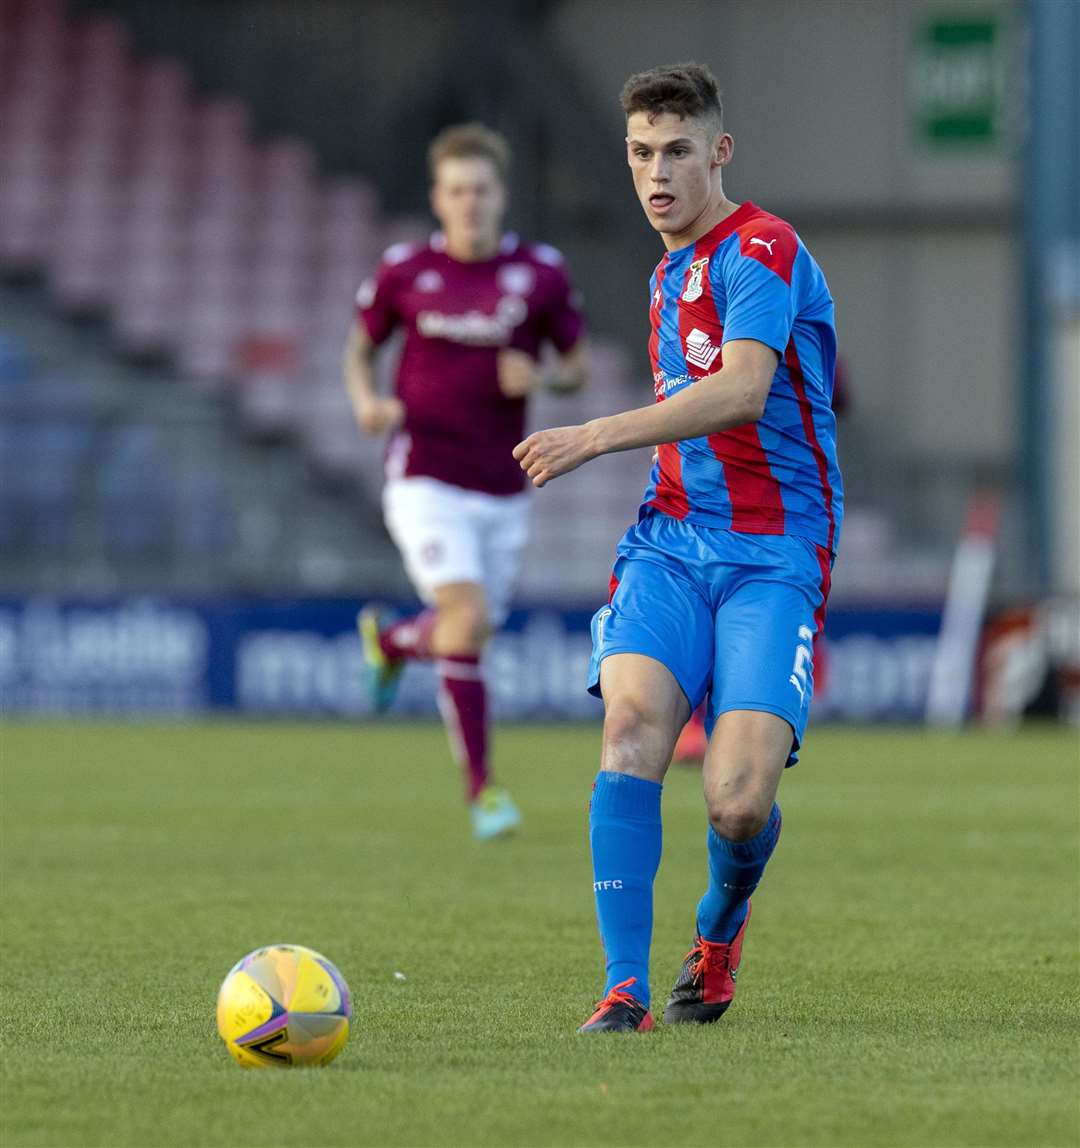 Picture - Ken Macpherson, Inverness. Inverness CT(3) v Arbroath(1). 31.10.19. ICT’s Wallace Duffy.